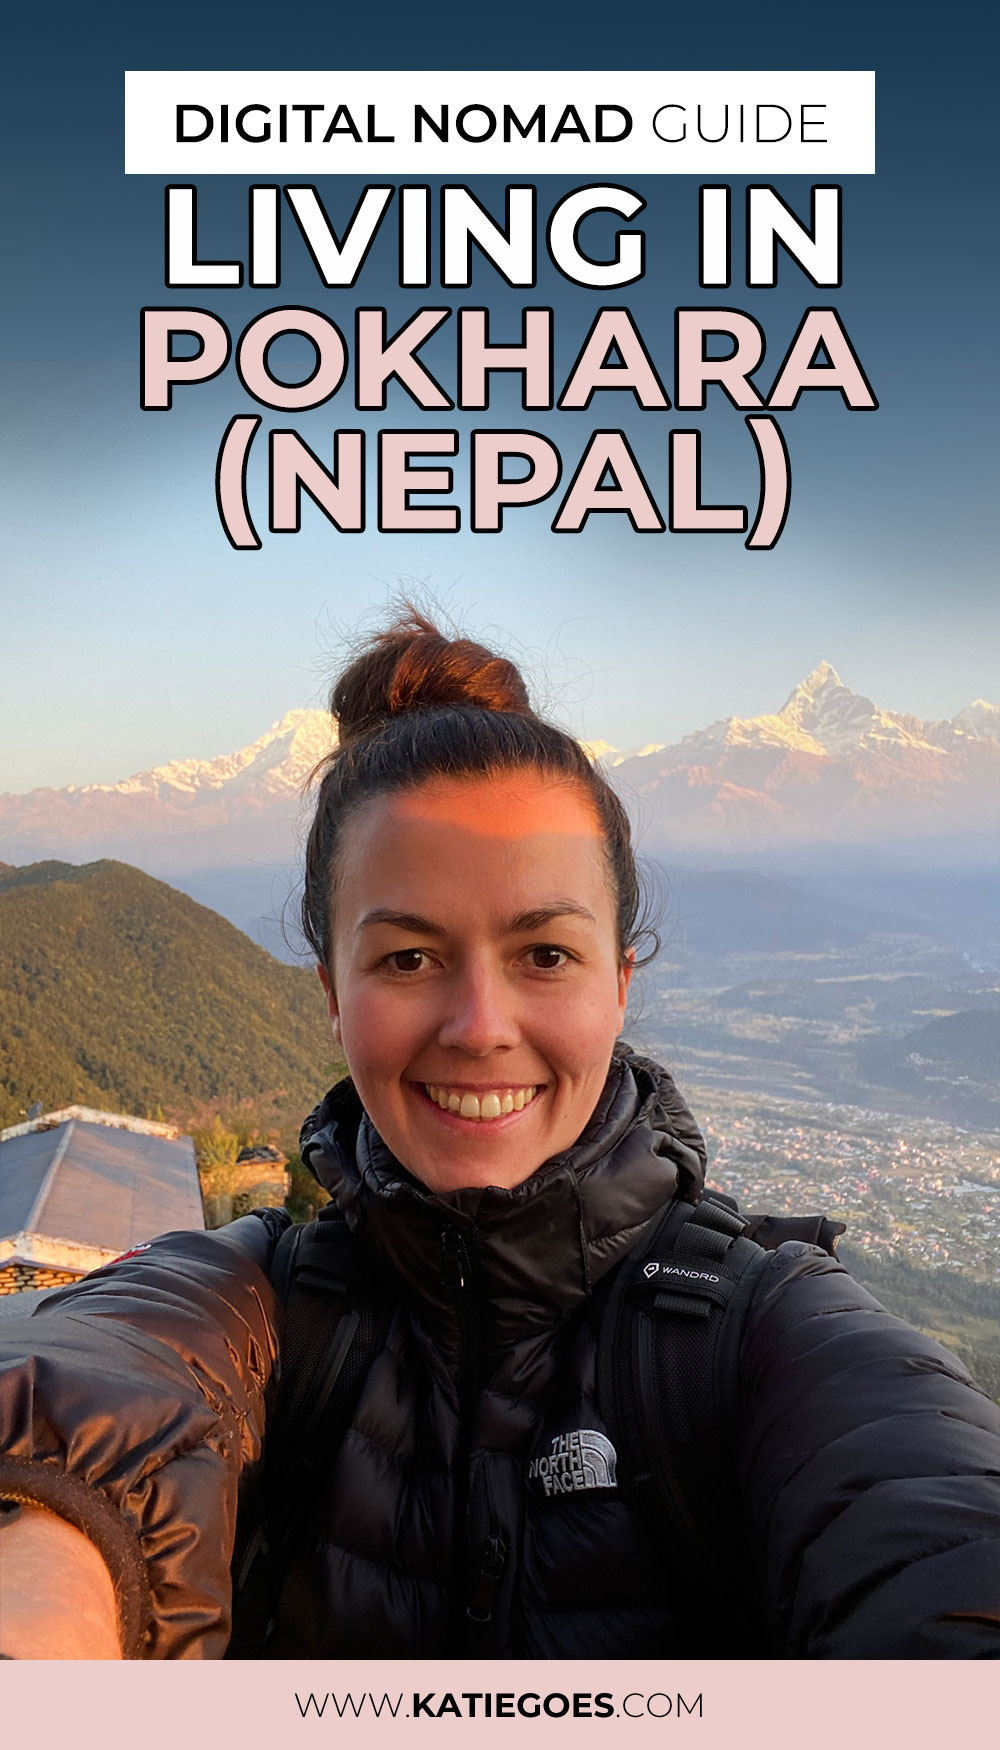 Digital Nomad Guide to Living in Pokhara (Nepal)